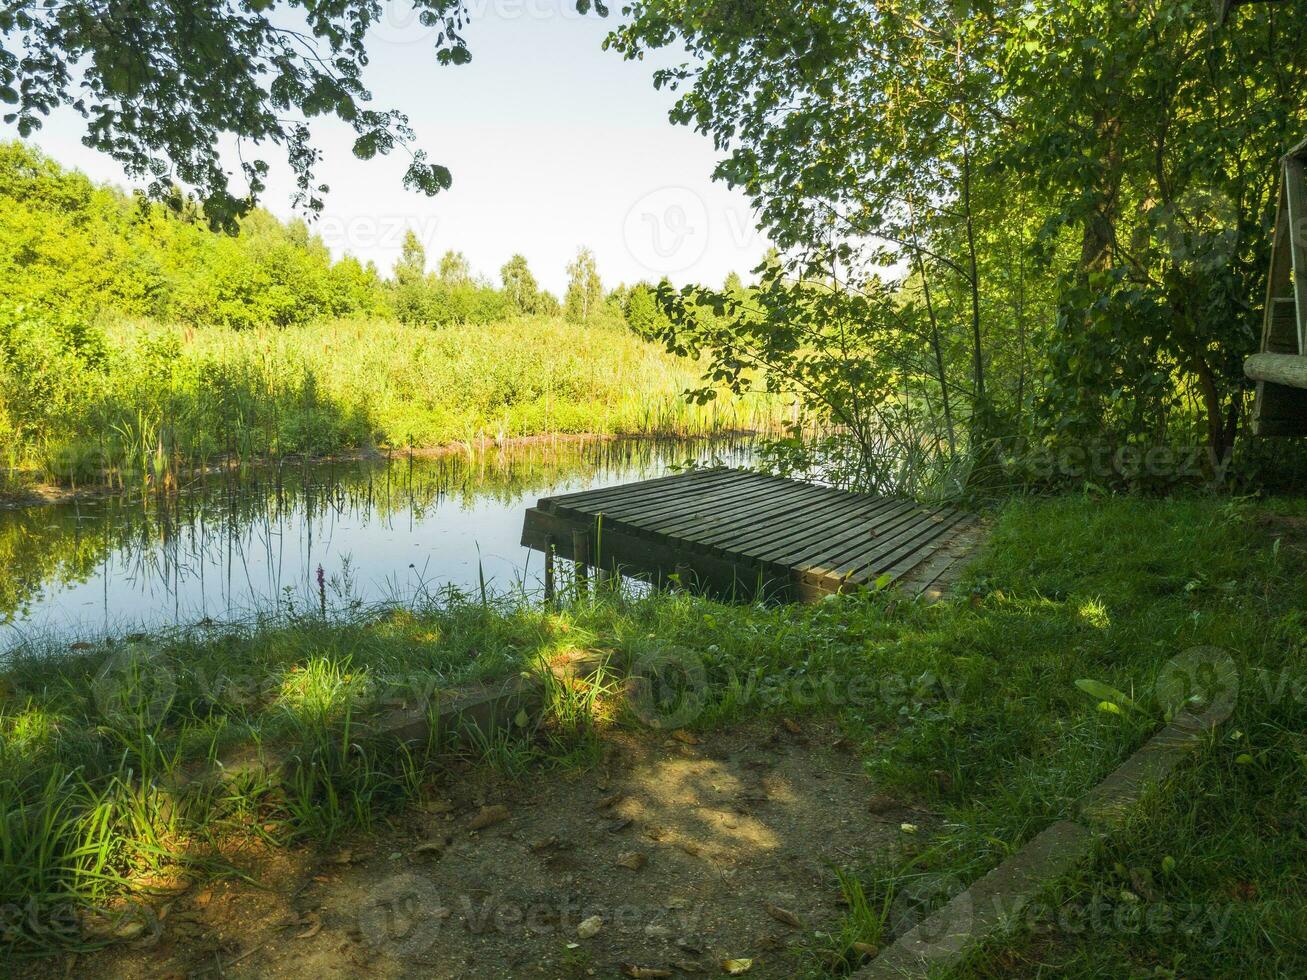 Landscape shot of the pond. Outdoors photo